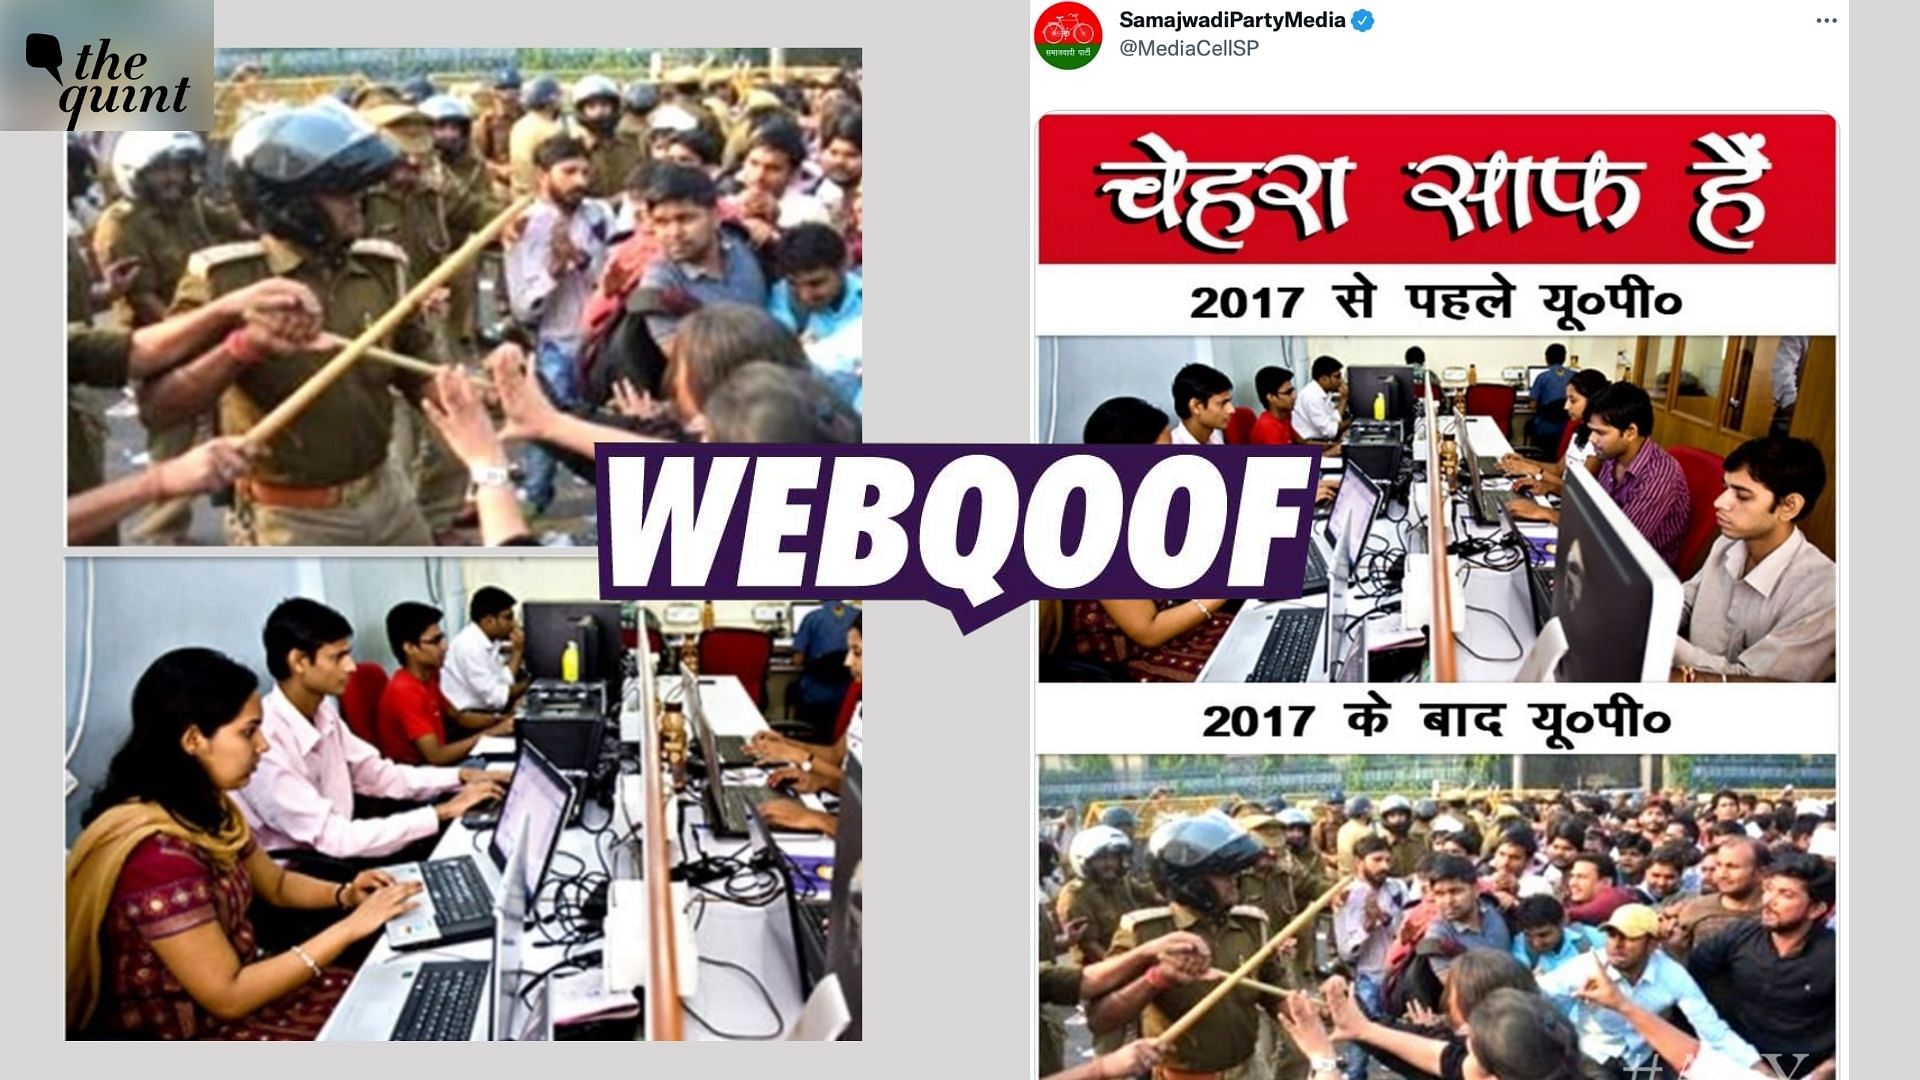 <div class="paragraphs"><p>The photo which claims to show youths working before 2017 is actually a picture from Mumbai.</p></div>